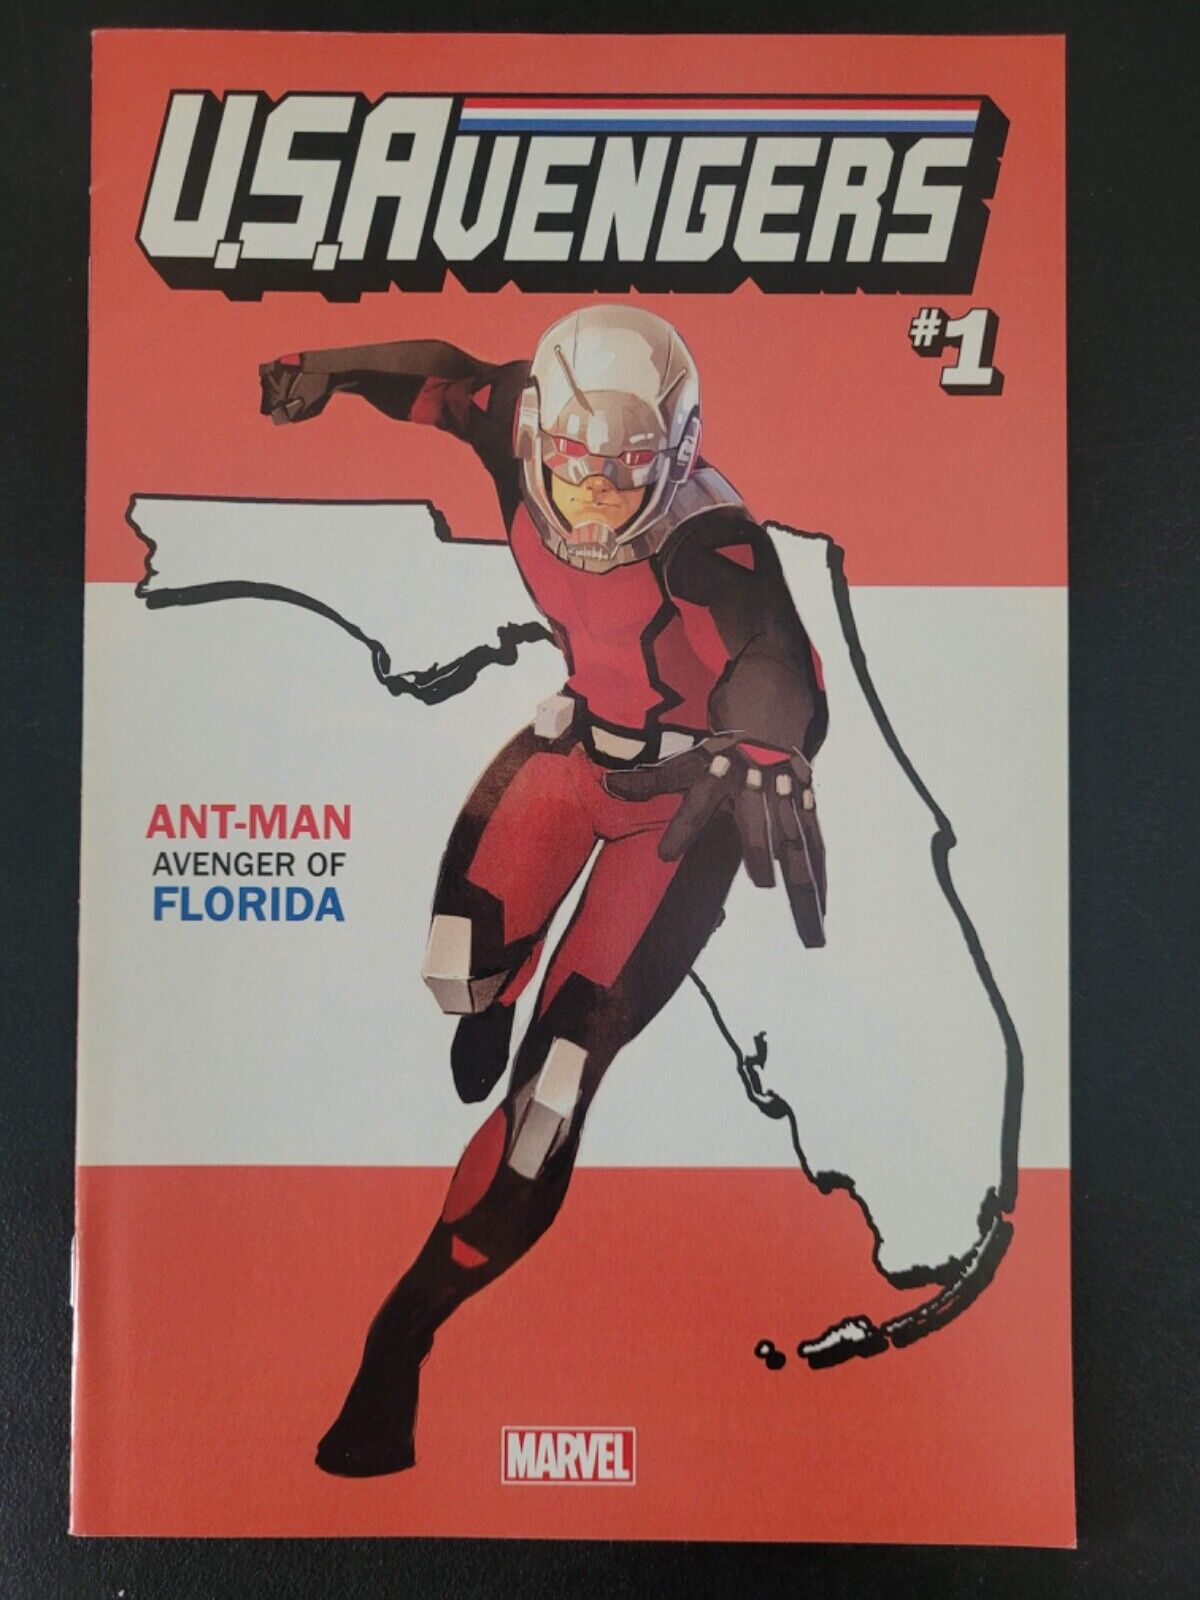 U.S.AVENGERS #1 (2017) MARVEL COMICS VARIANT COVER P FLORIDA STATE ANT-MAN COVER